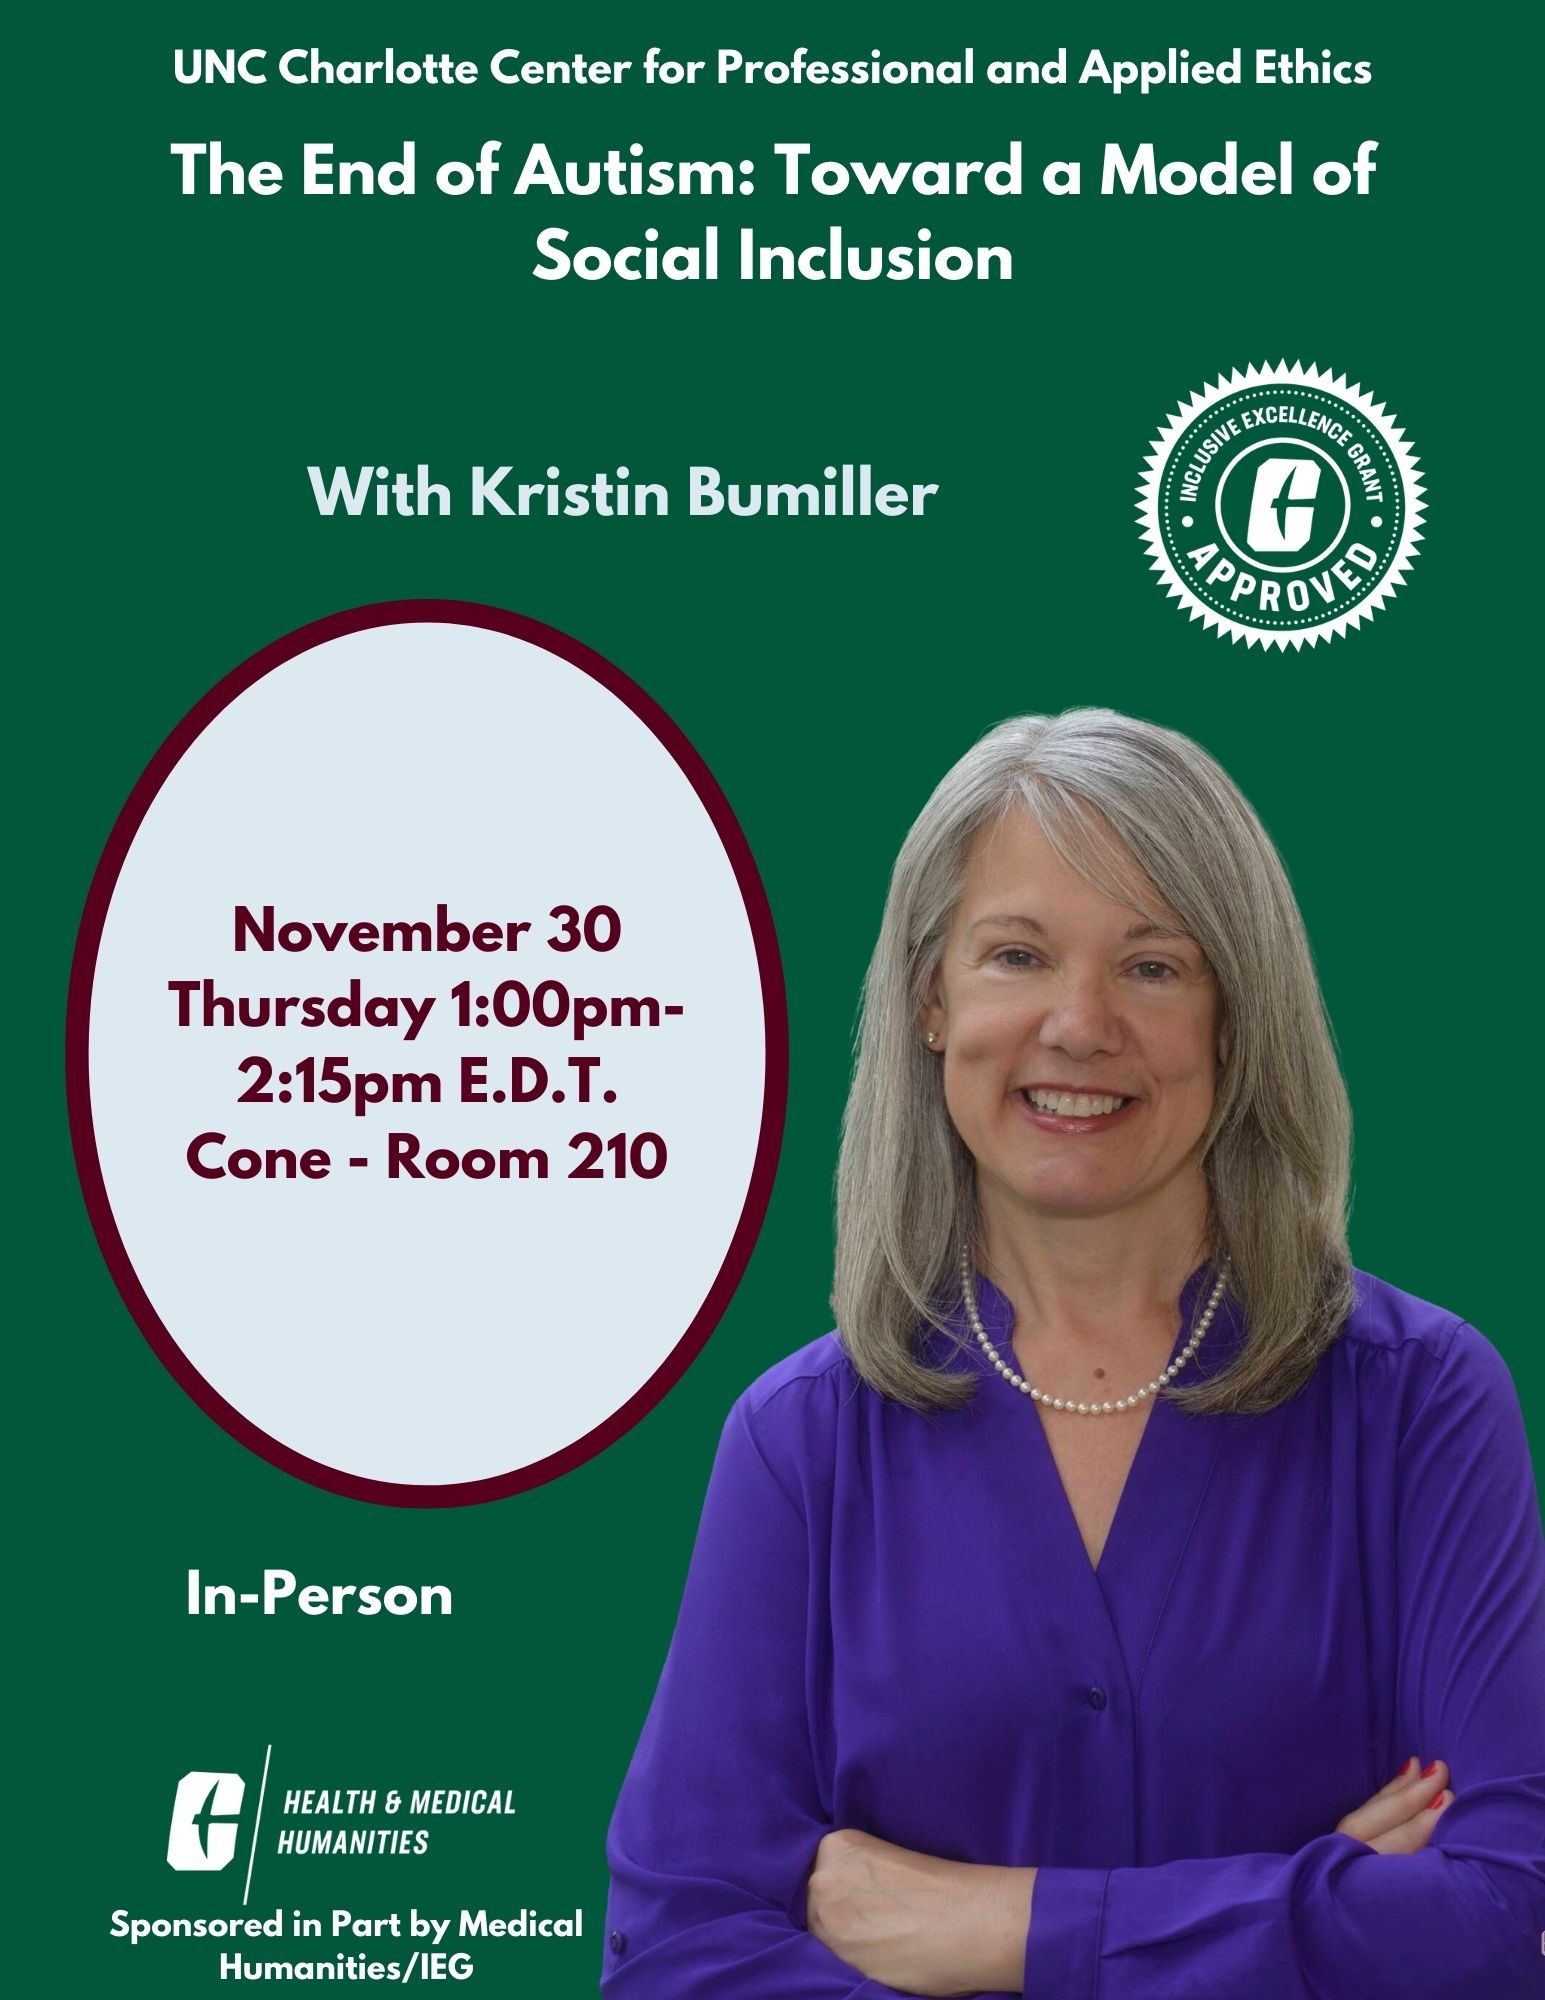 Kristin Bumiller,  "The End of Autism: Toward a Model of Social Inclusion"